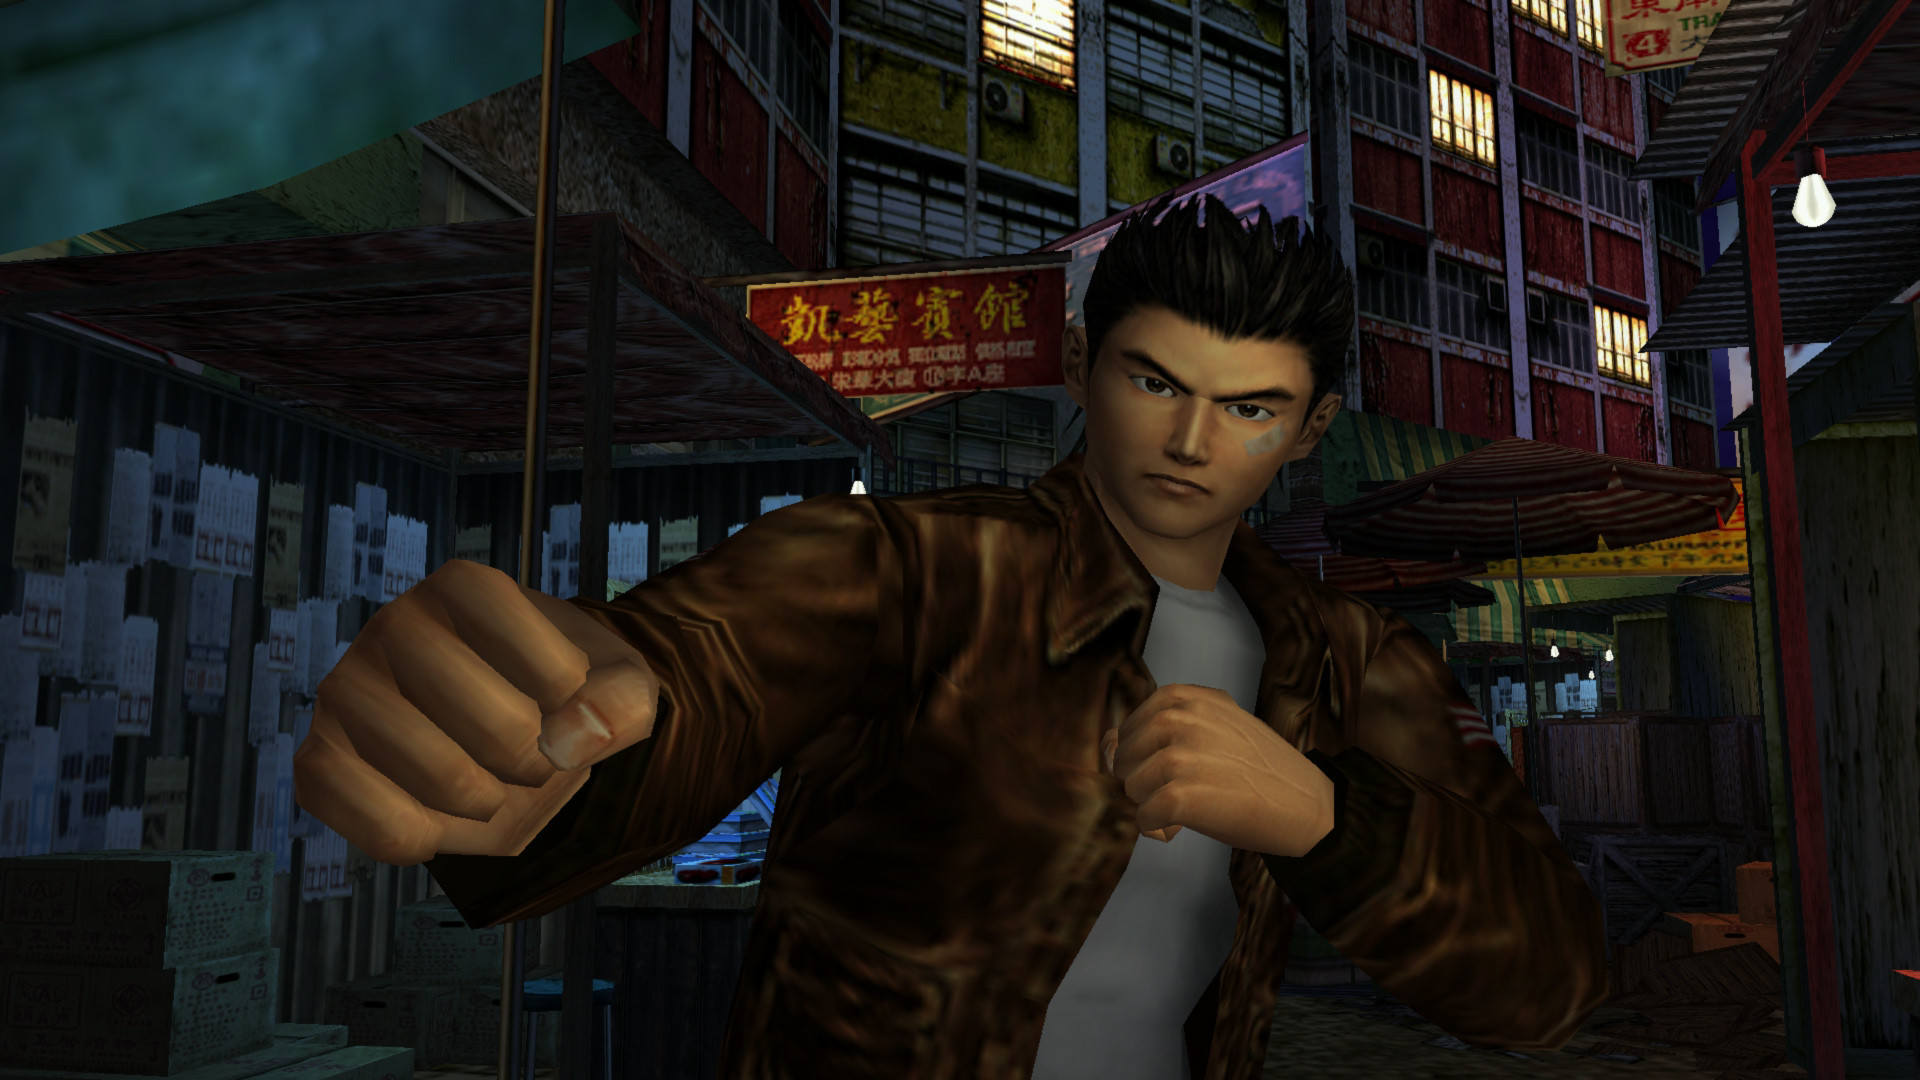 Nice Images Collection: Shenmue Desktop Wallpapers